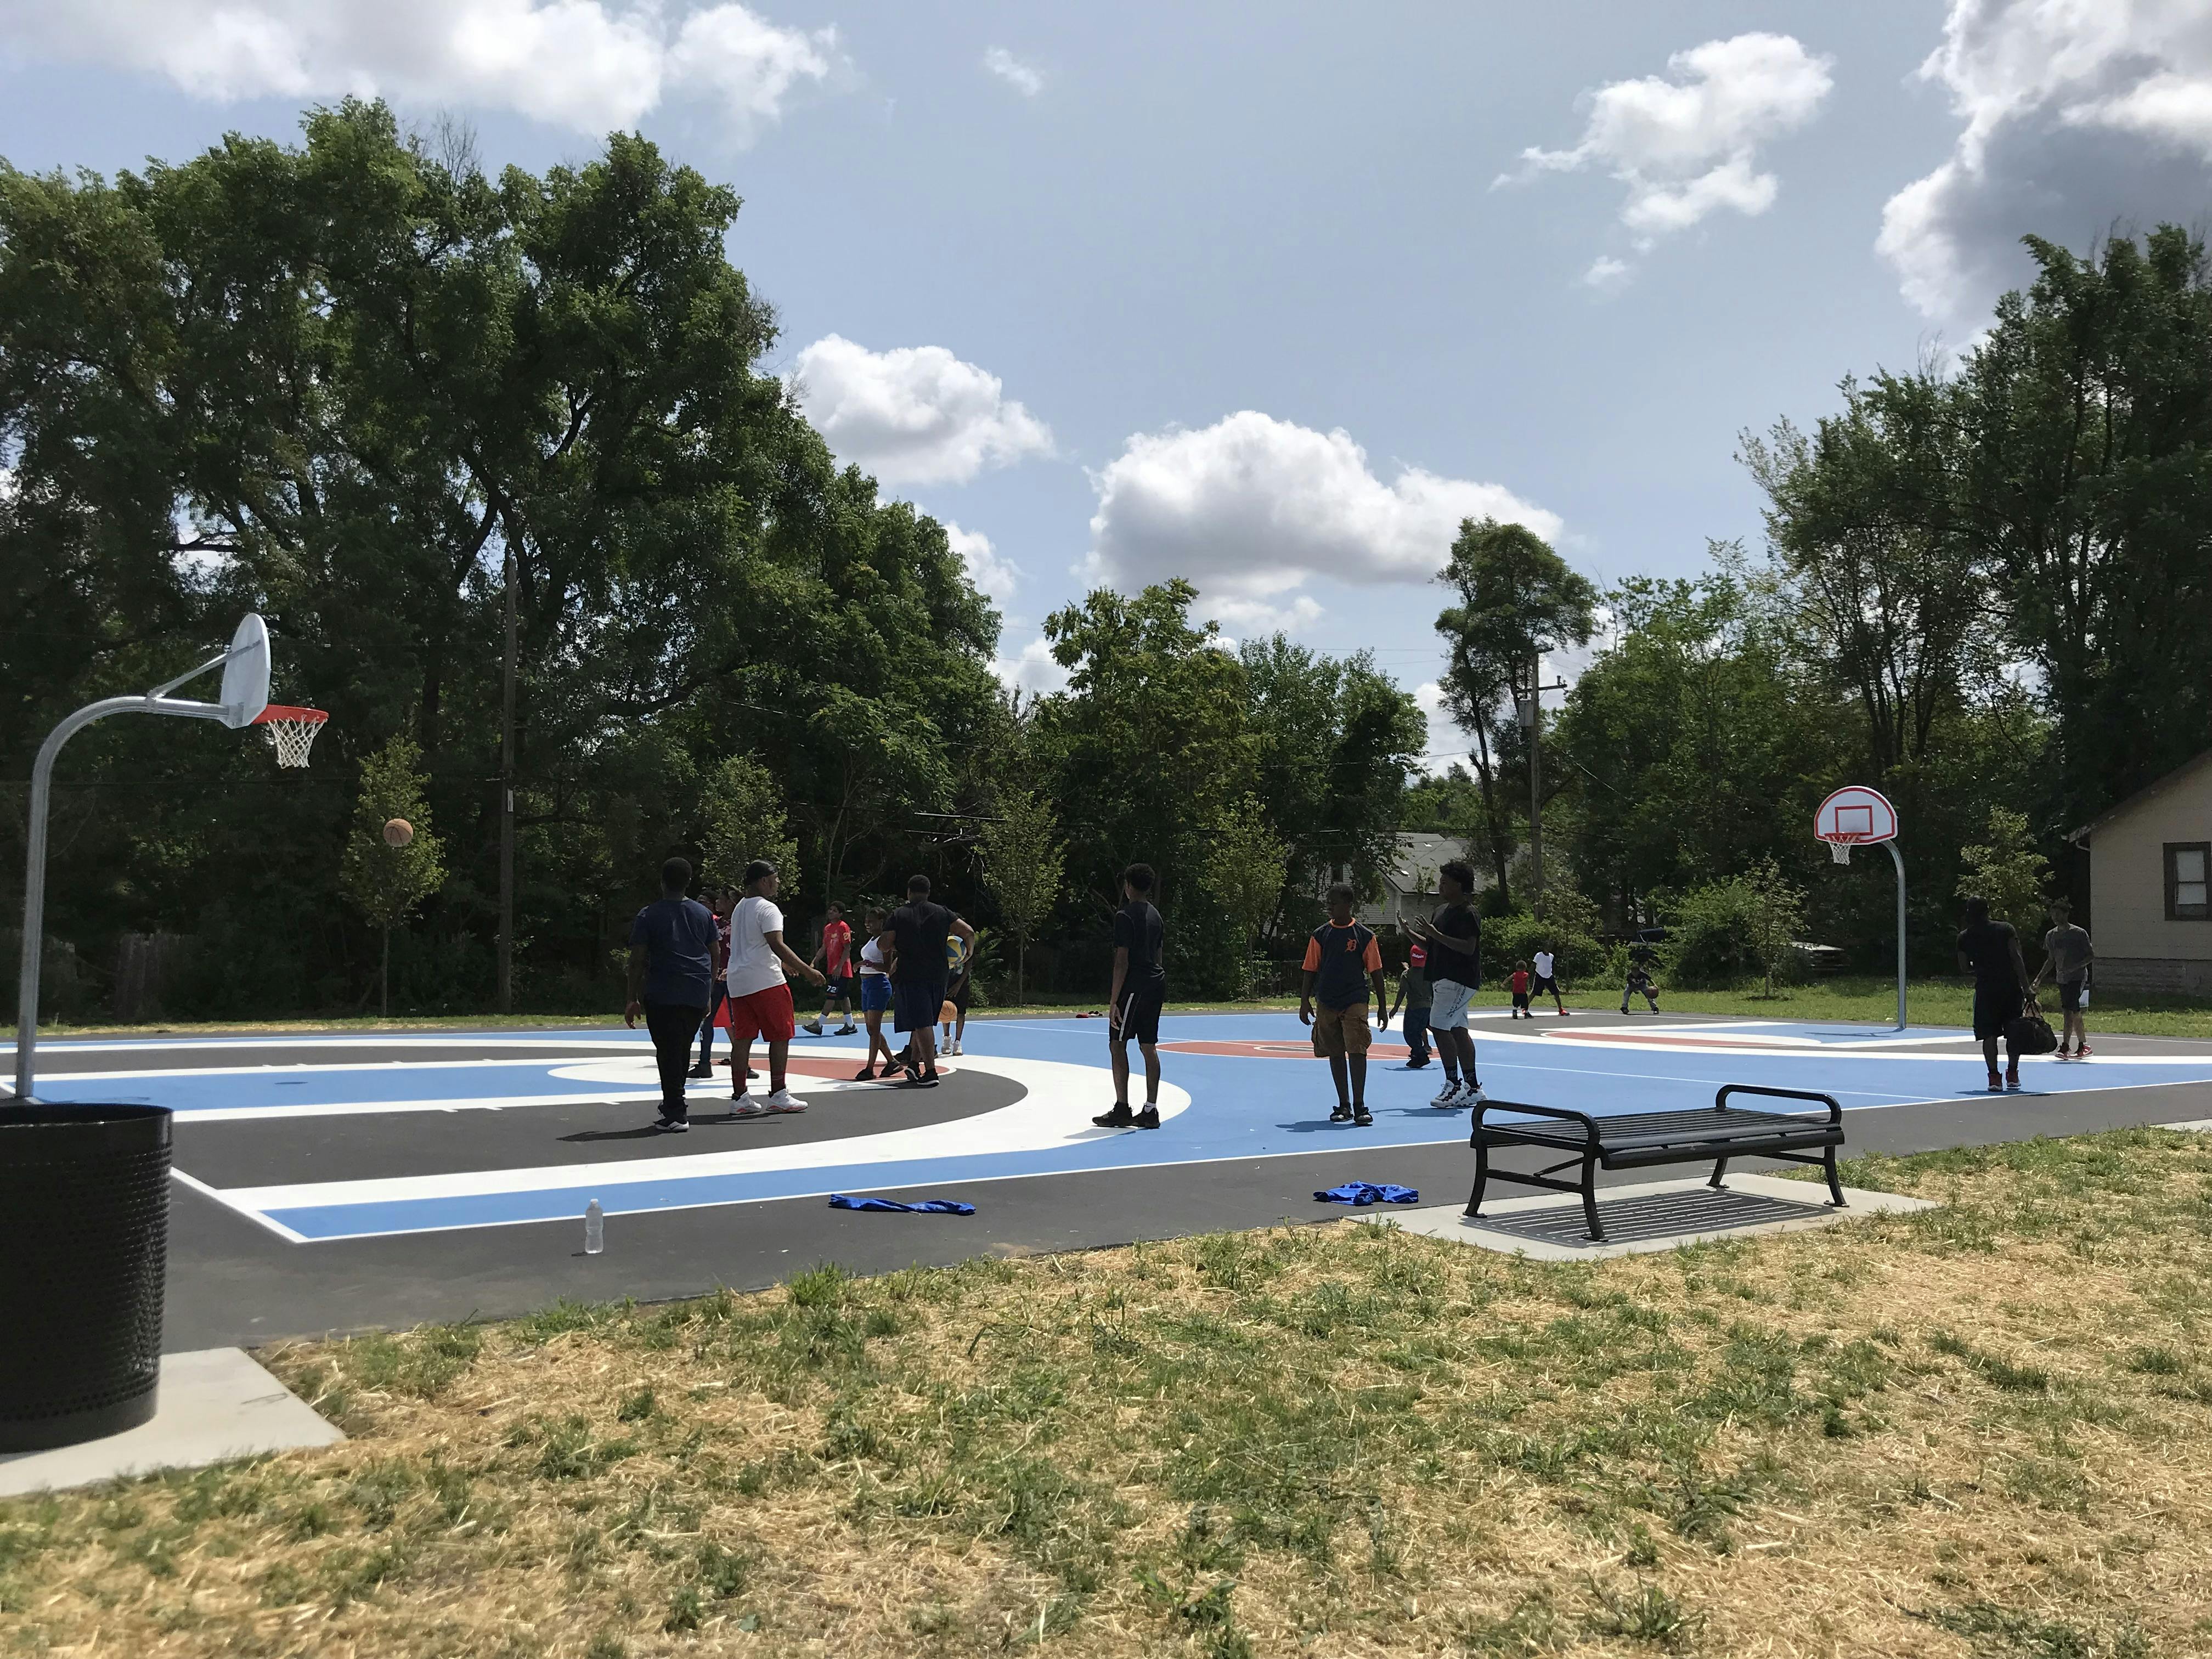 Constructed photograph of colorful basketball court with children playing basketball.